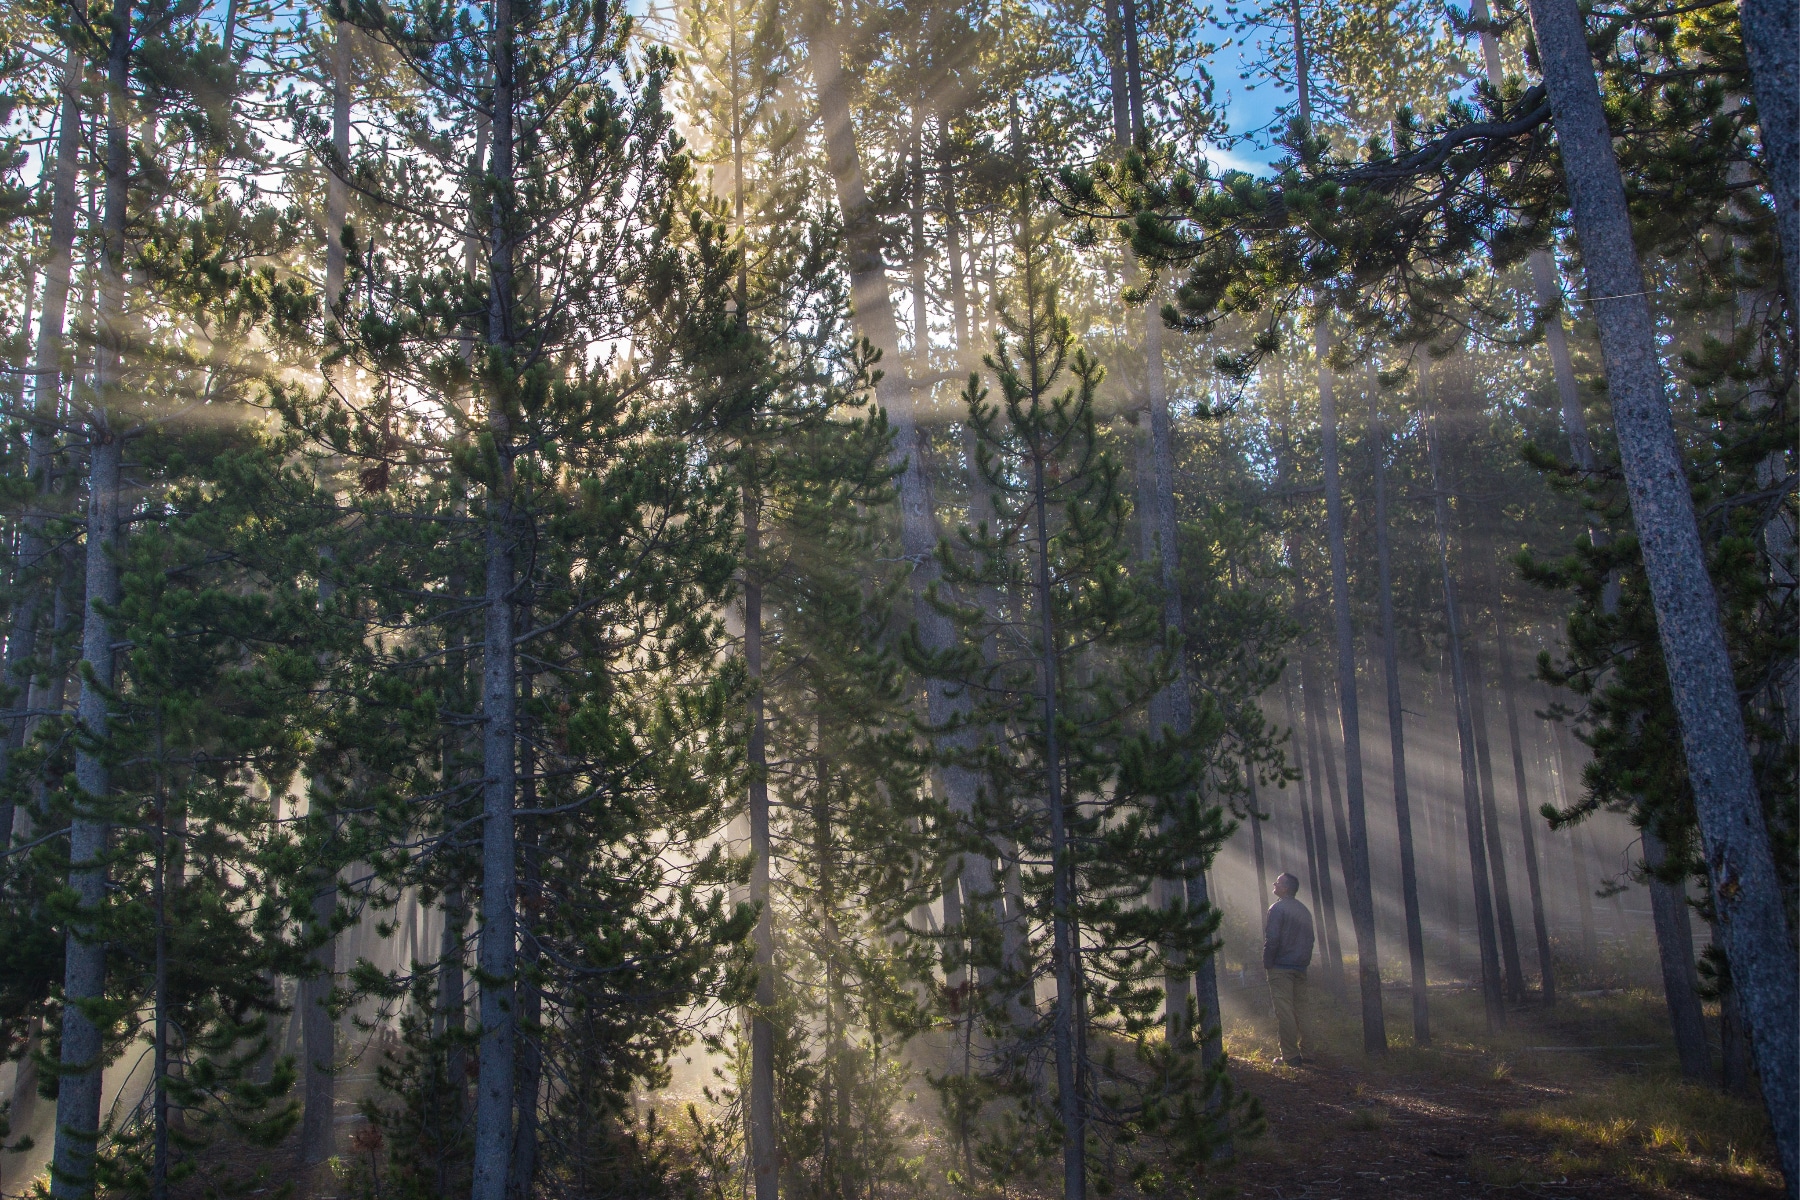 Sunlight through pine trees in Yellowstone National Park. Yellowstone in the fall 